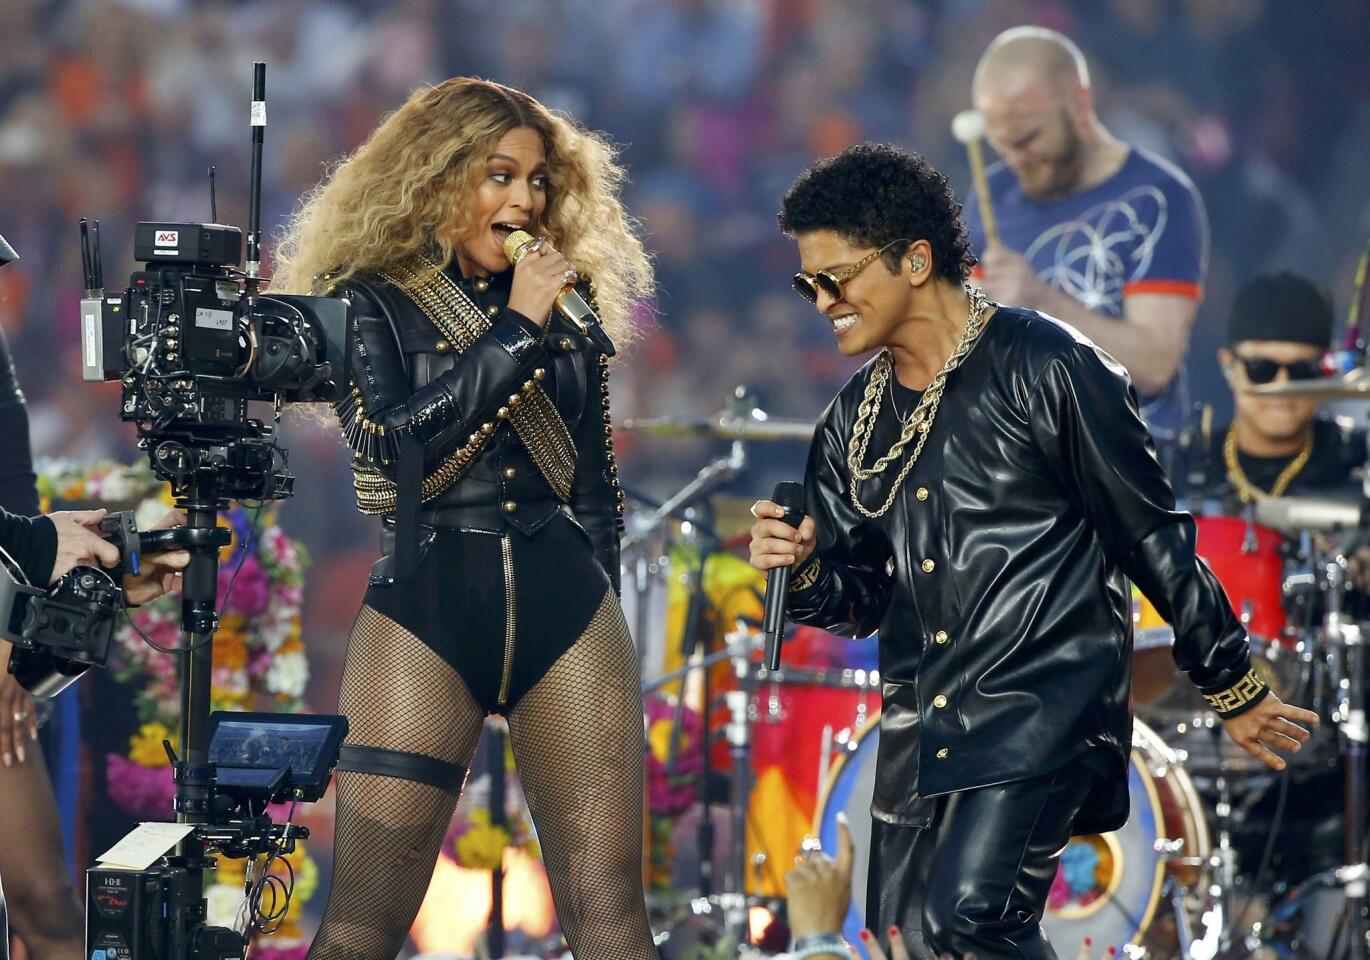 Beyonce and Bruno Mars perform during half-time show at the NFL's Super Bowl 50 football game between the Carolina Panthers and the Denver Broncos in Santa Clara, California February 7, 2016. REUTERS/Mike Blake